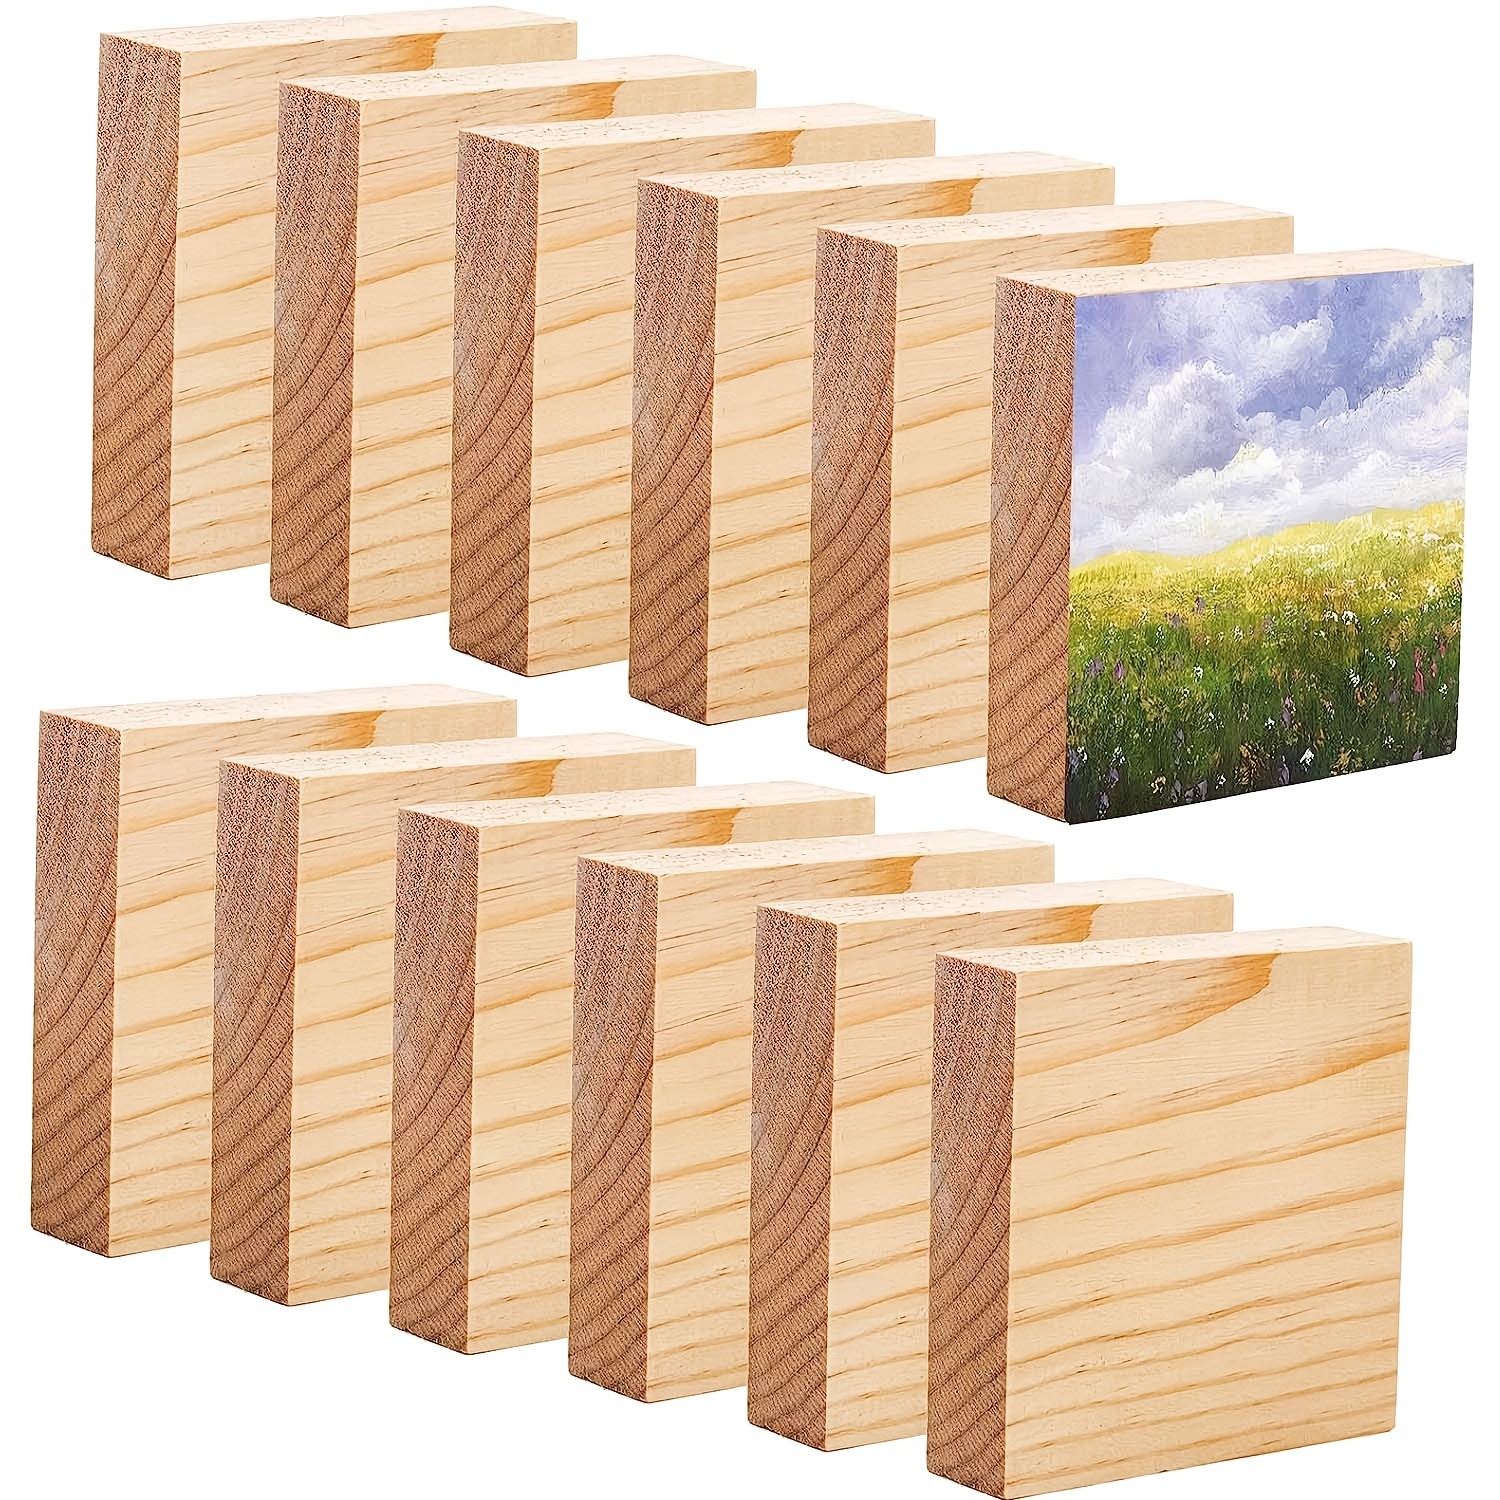 2pcs 5x5'' Wood Panel Boards, Wood Canvas Wooden For Crafts, Painting  Canvas, DIY Art Projects, Pouring